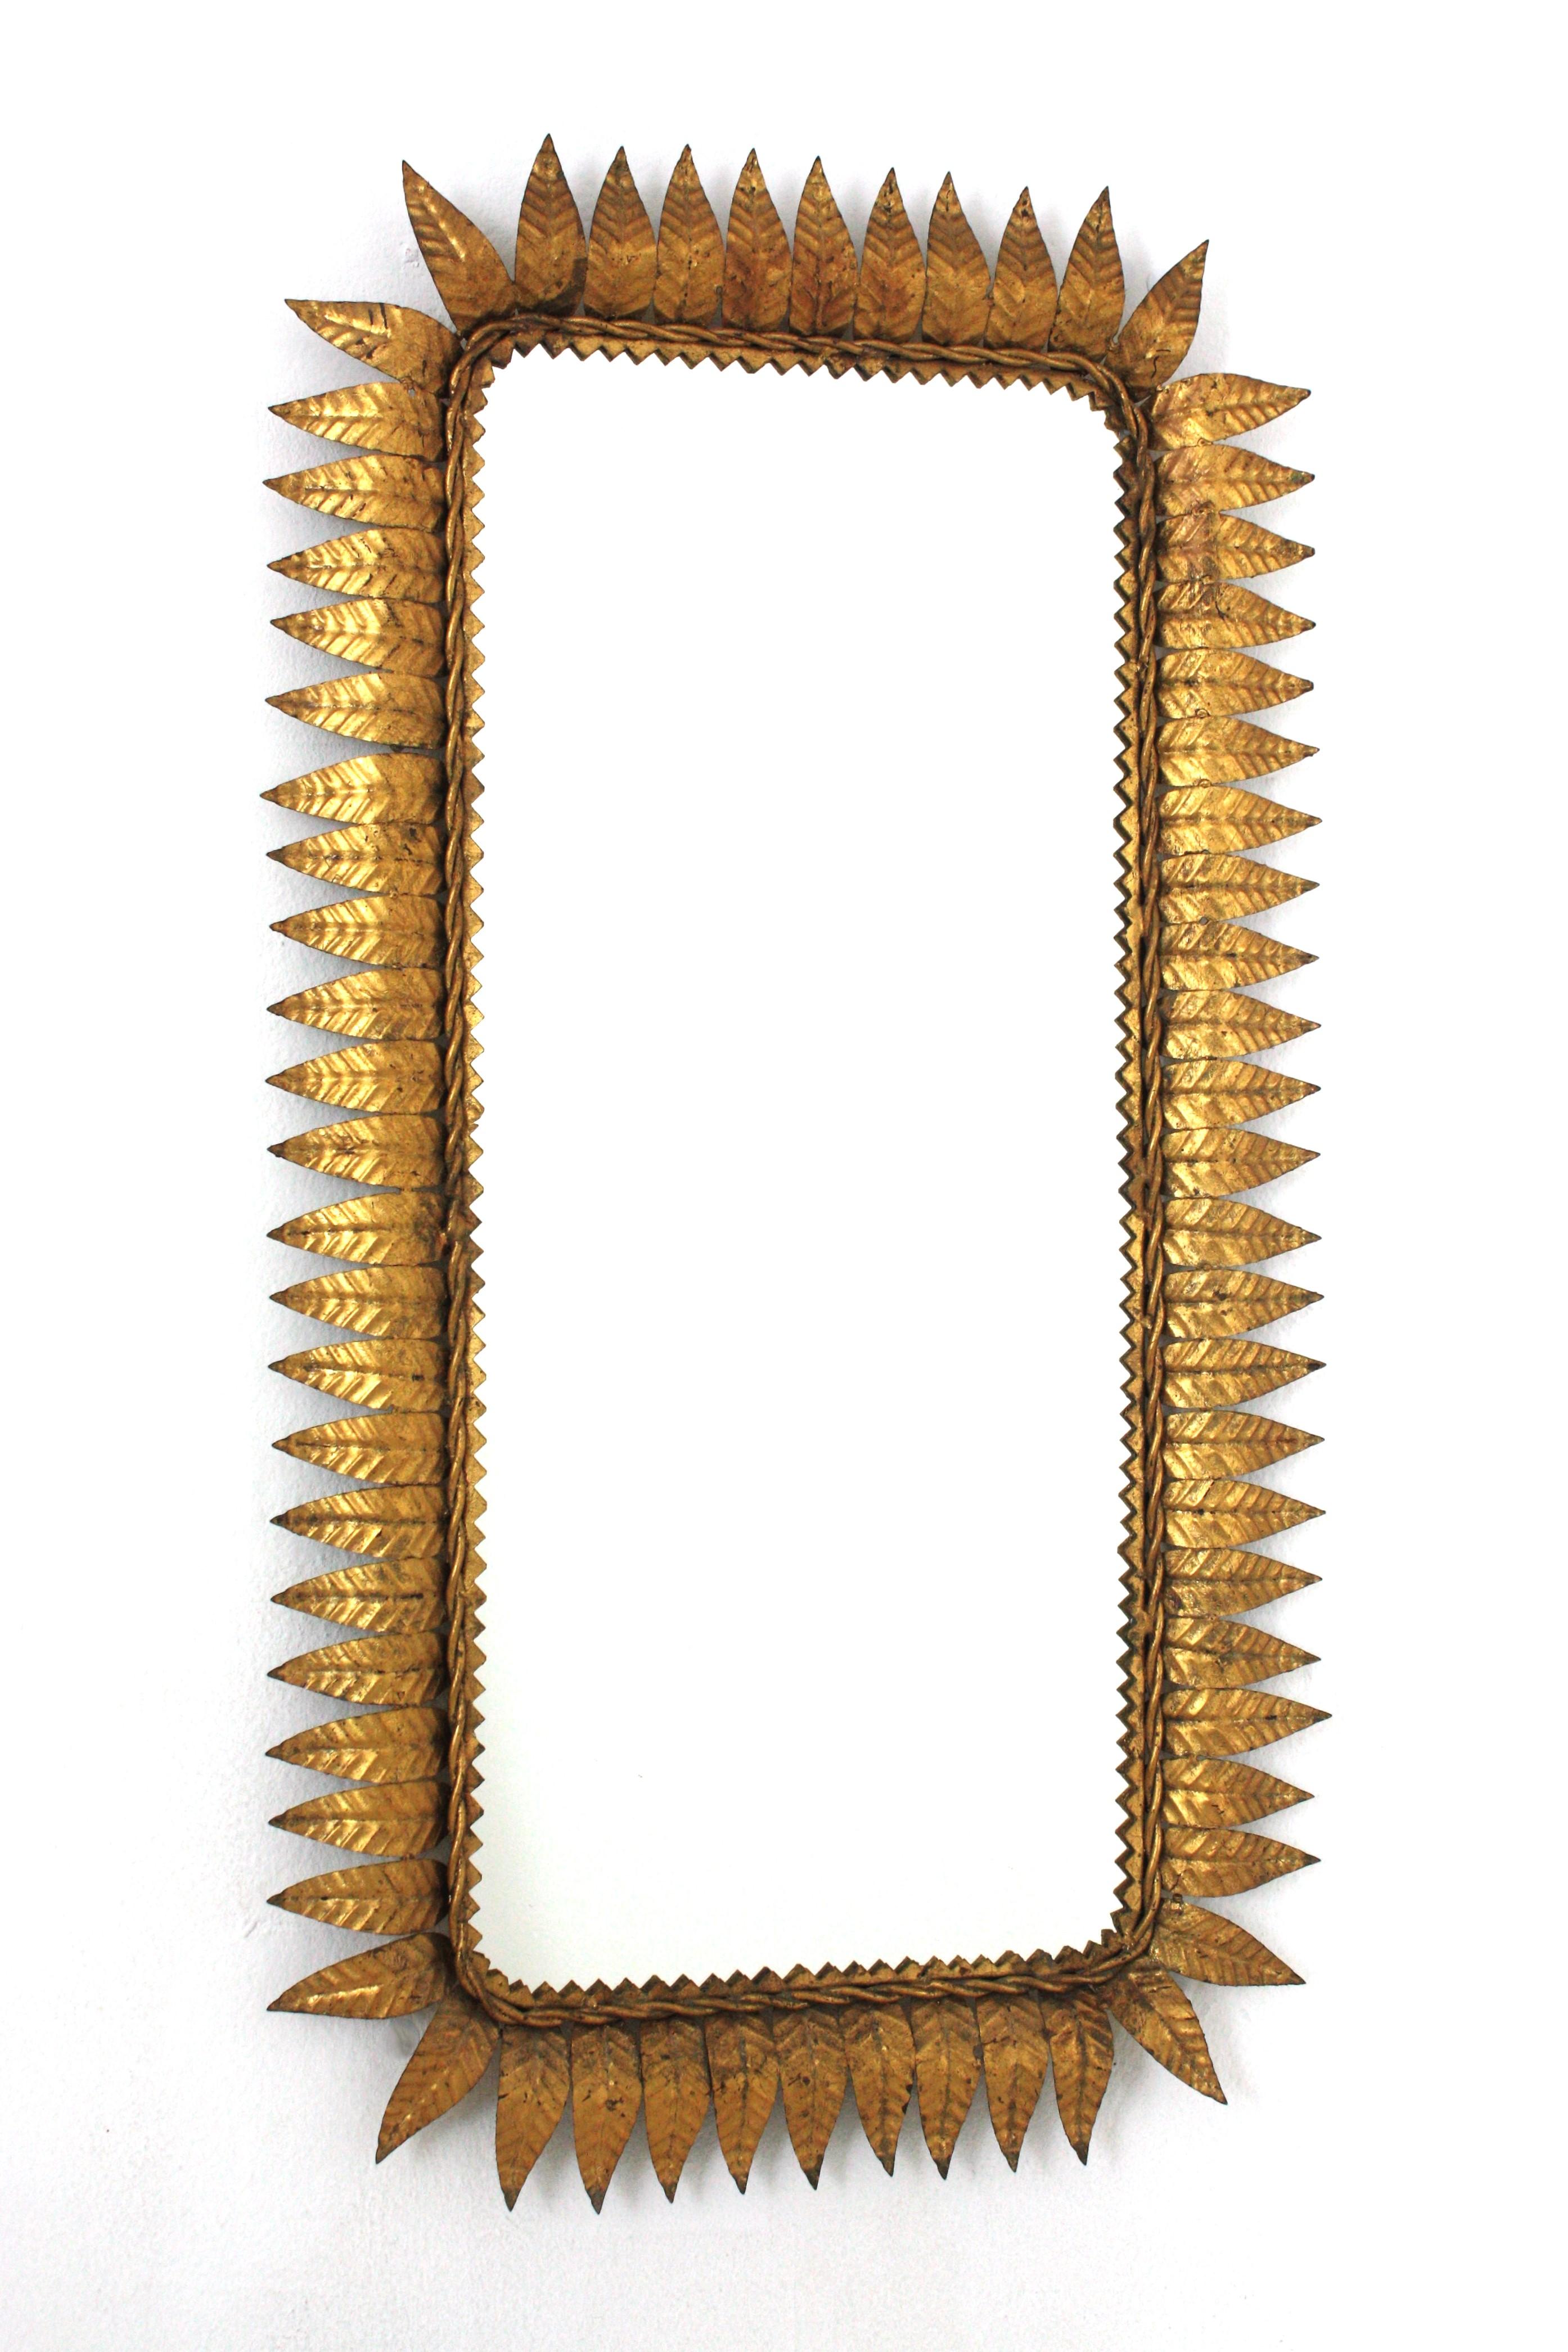 Wrought Gilt iron sunburst rectangular wall mirror with gold leaf finish, France, 1940s.
Highly decorative rectangular leaf framed sunburst mirror with gold leaf gilding.
Entirely made by hand. Twisted iron rope and eye-catching jagged edge